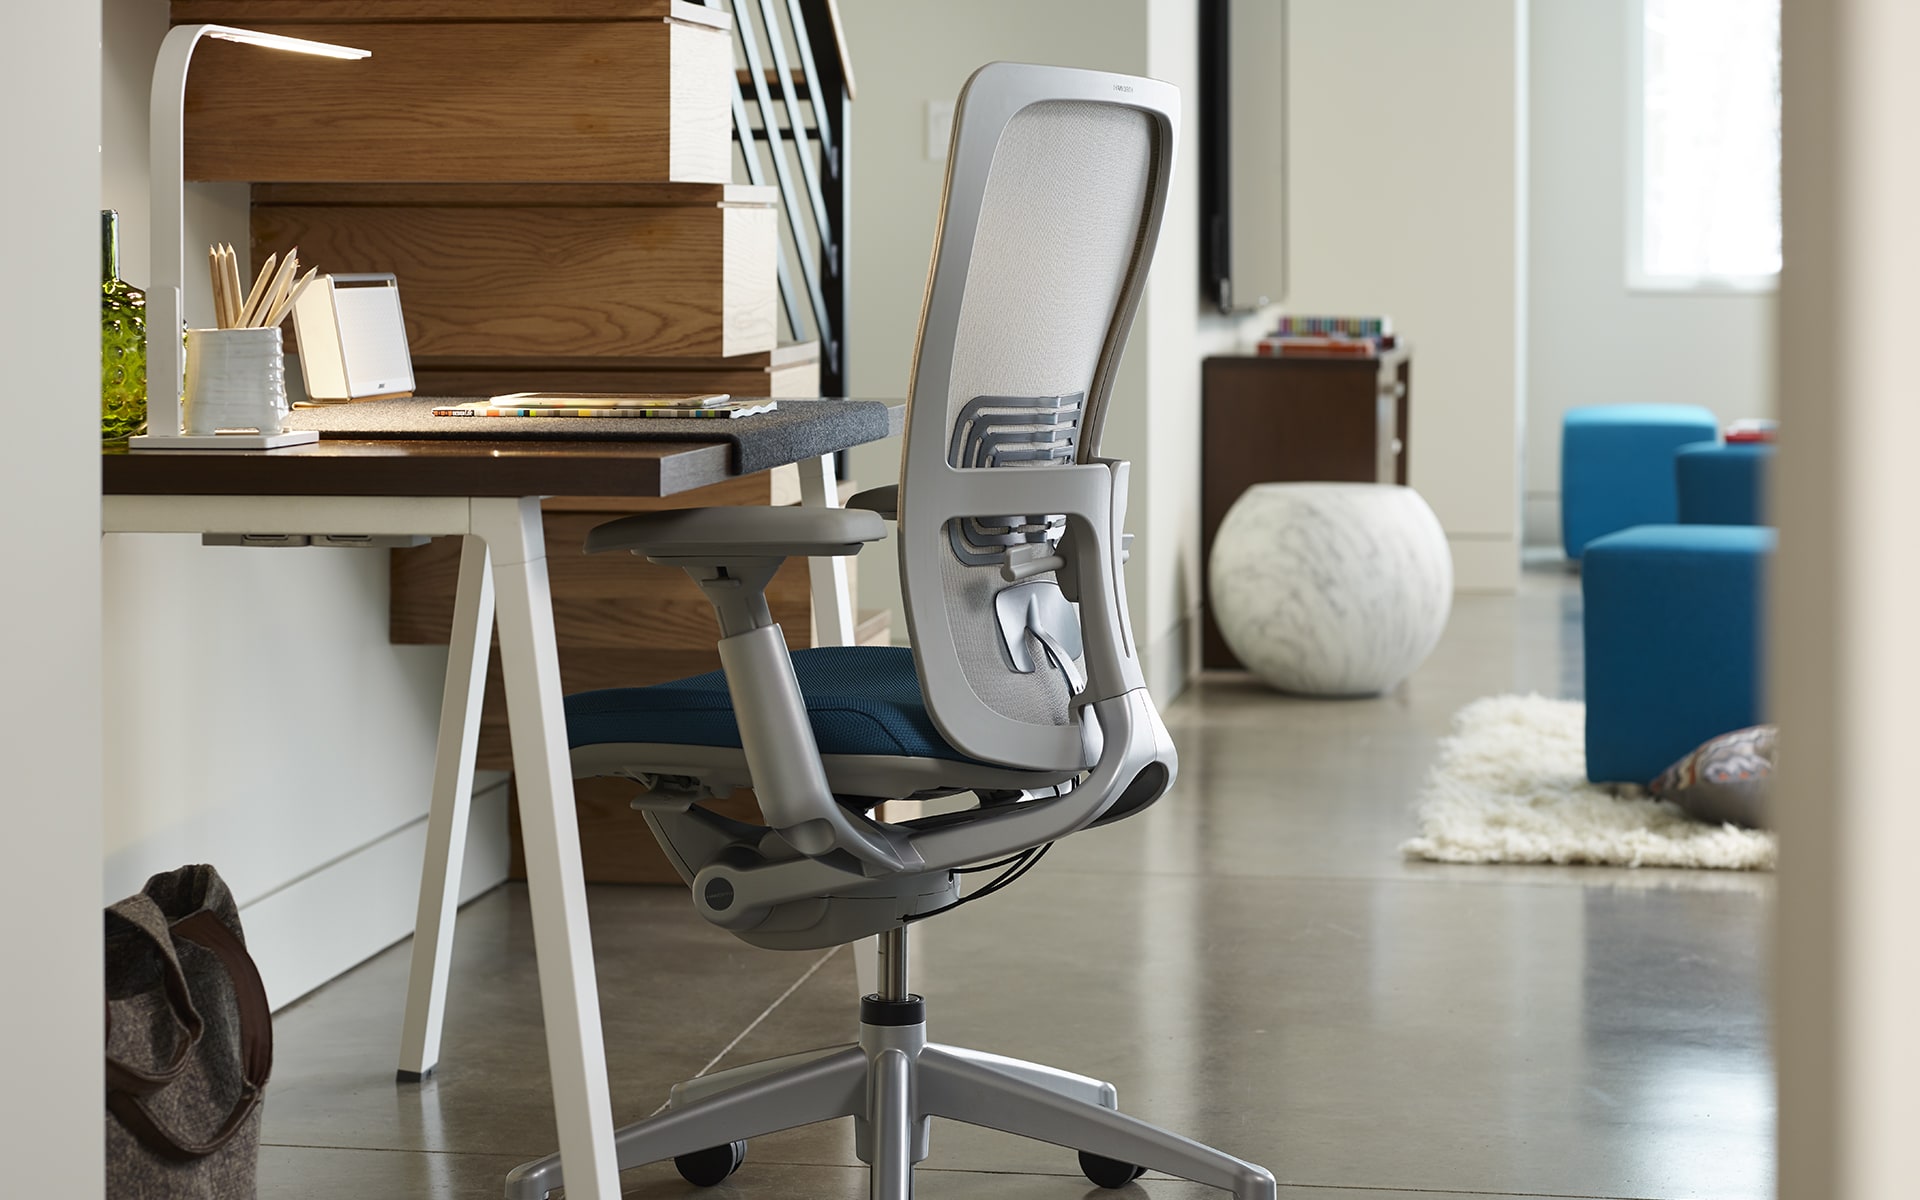 Haworth office chair Zody by ITO Design with gray backrest and blue upholstery at modern home workplace